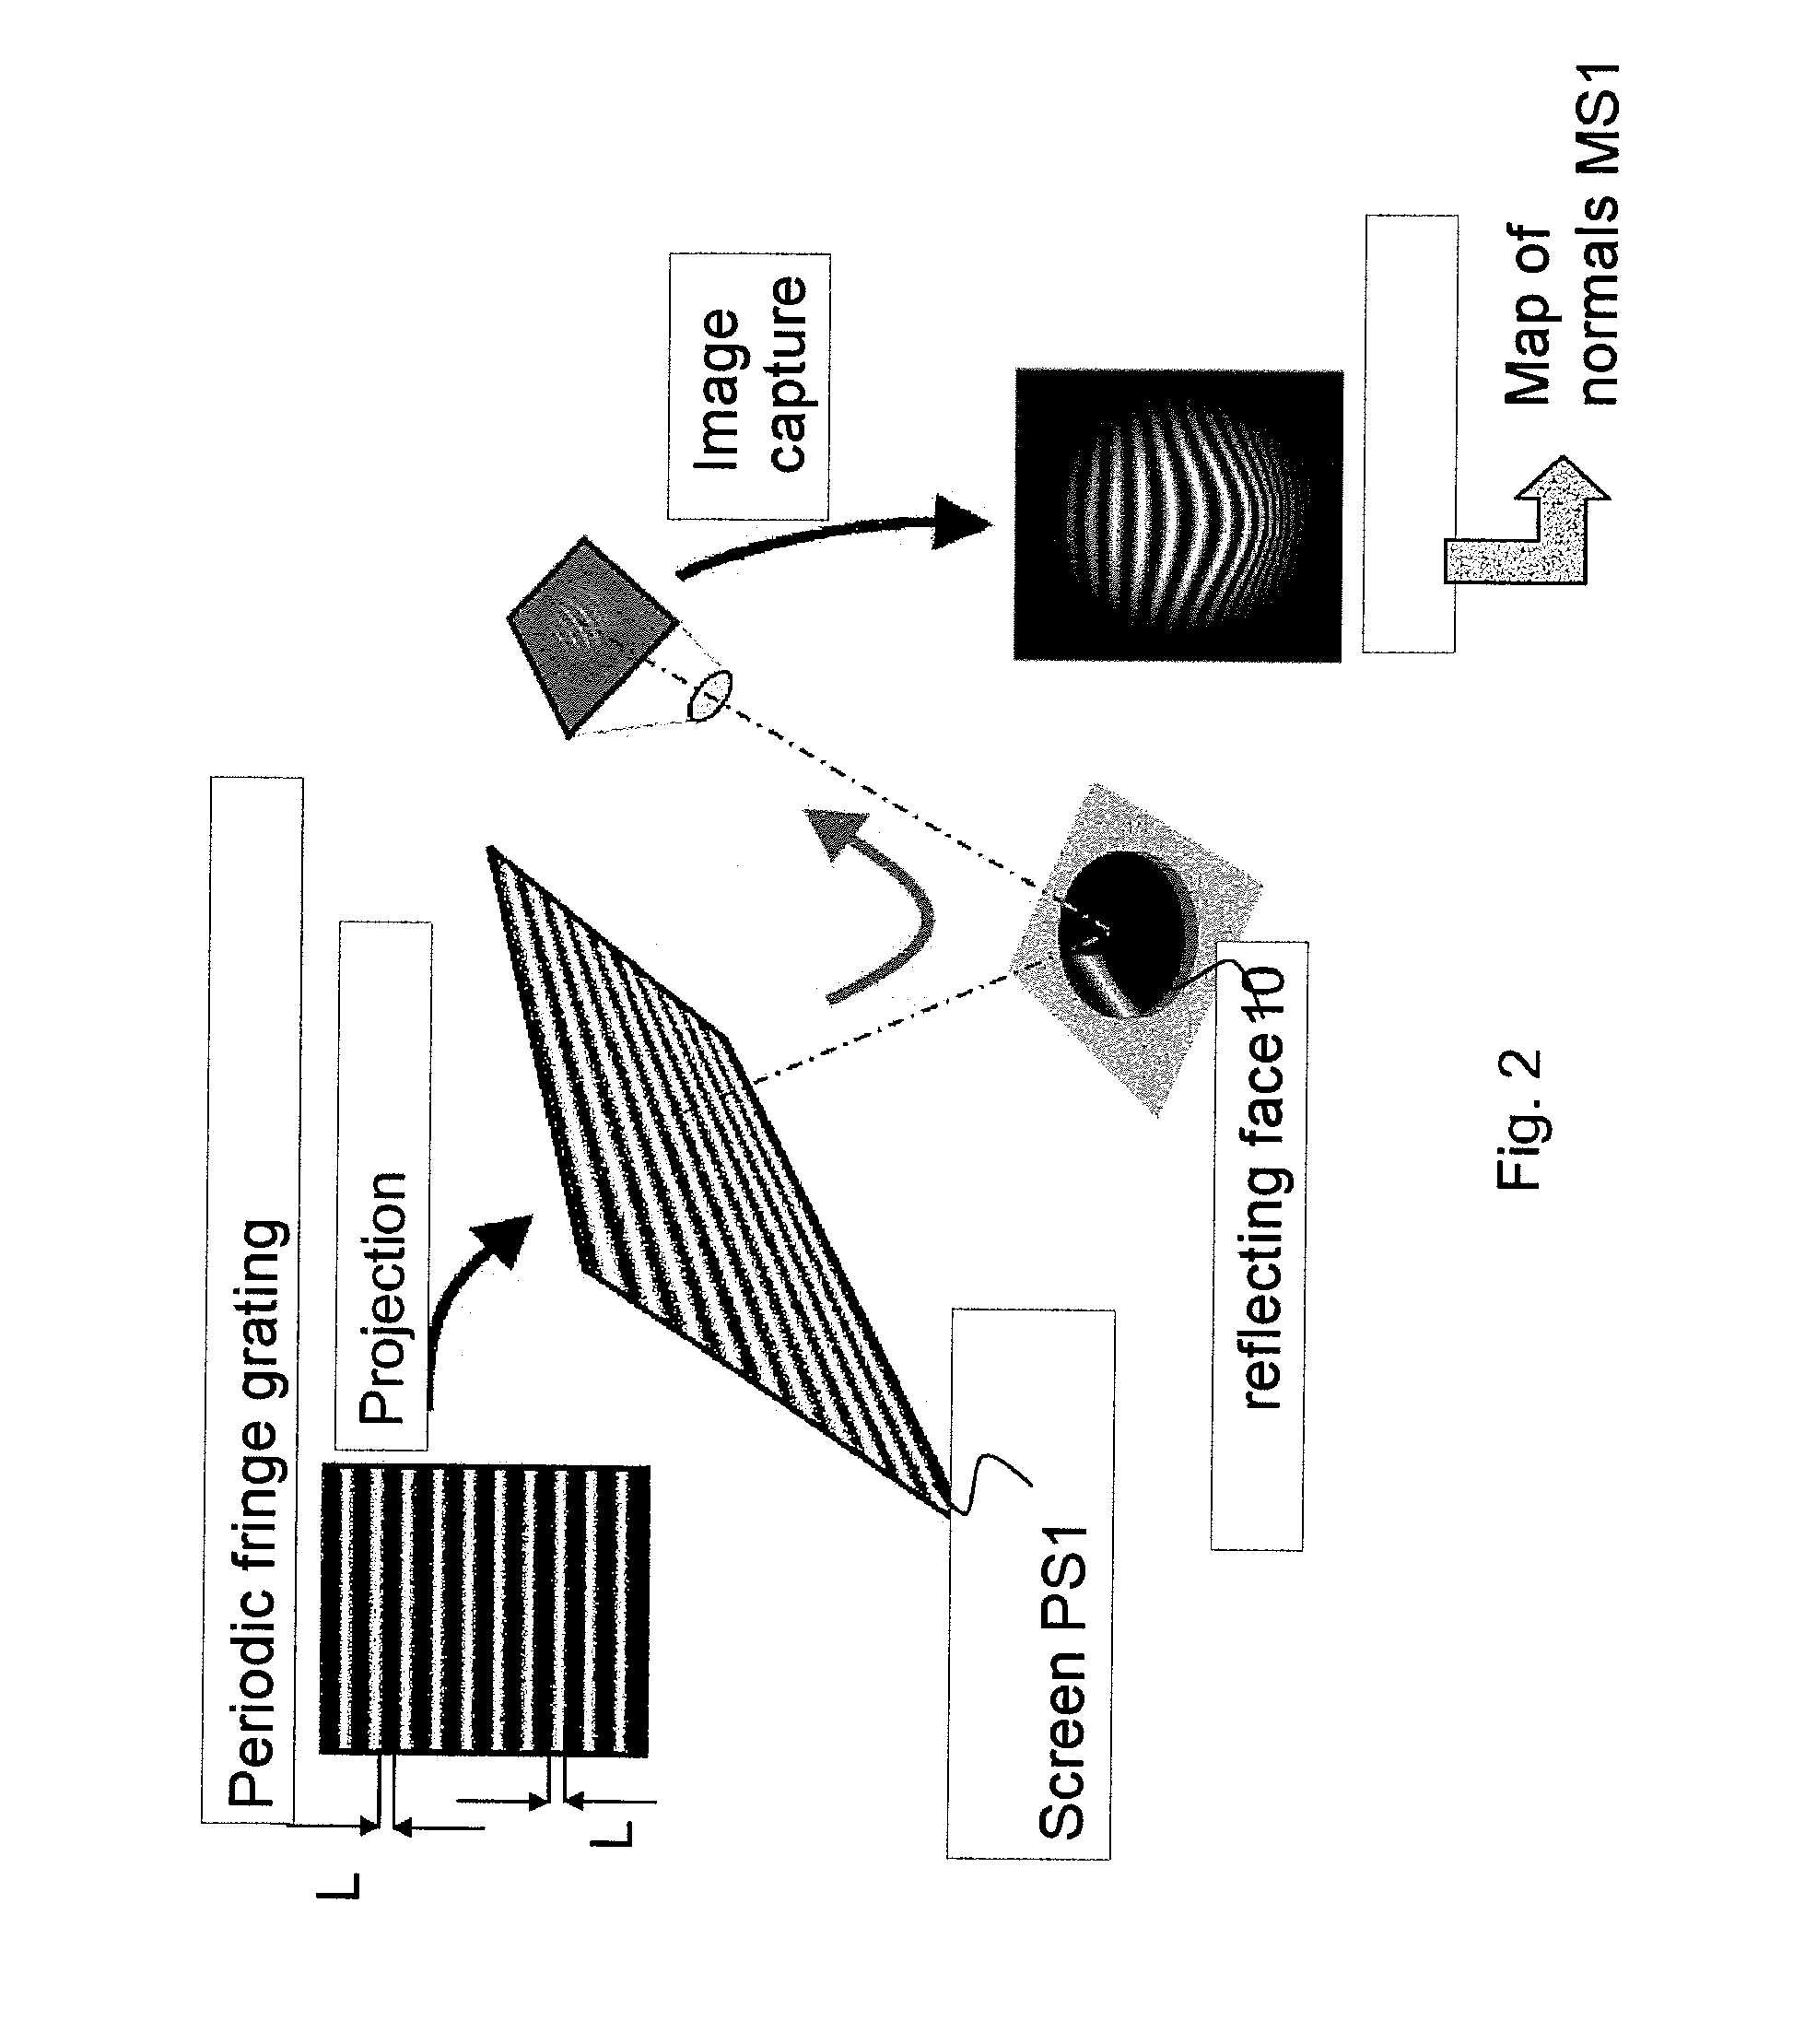 Method And Tool For Measuring The Geometric Structure Of An Optical Component